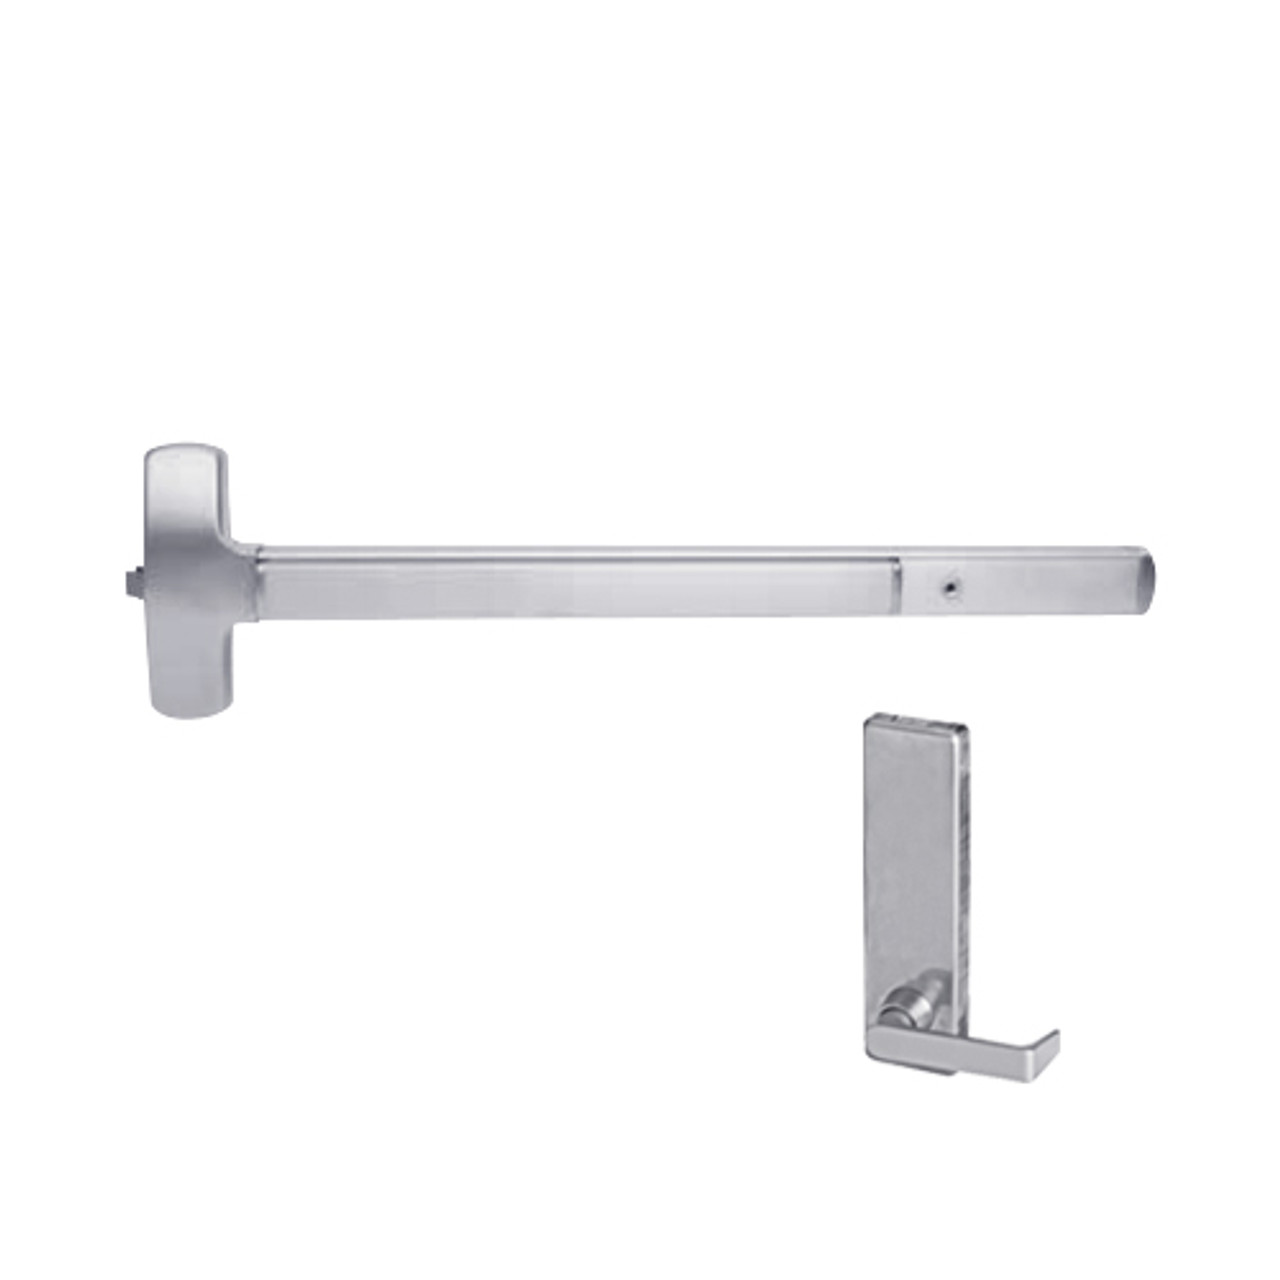 25-R-L-DT-DANE-US32-4-LHR Falcon Exit Device in Polished Stainless Steel